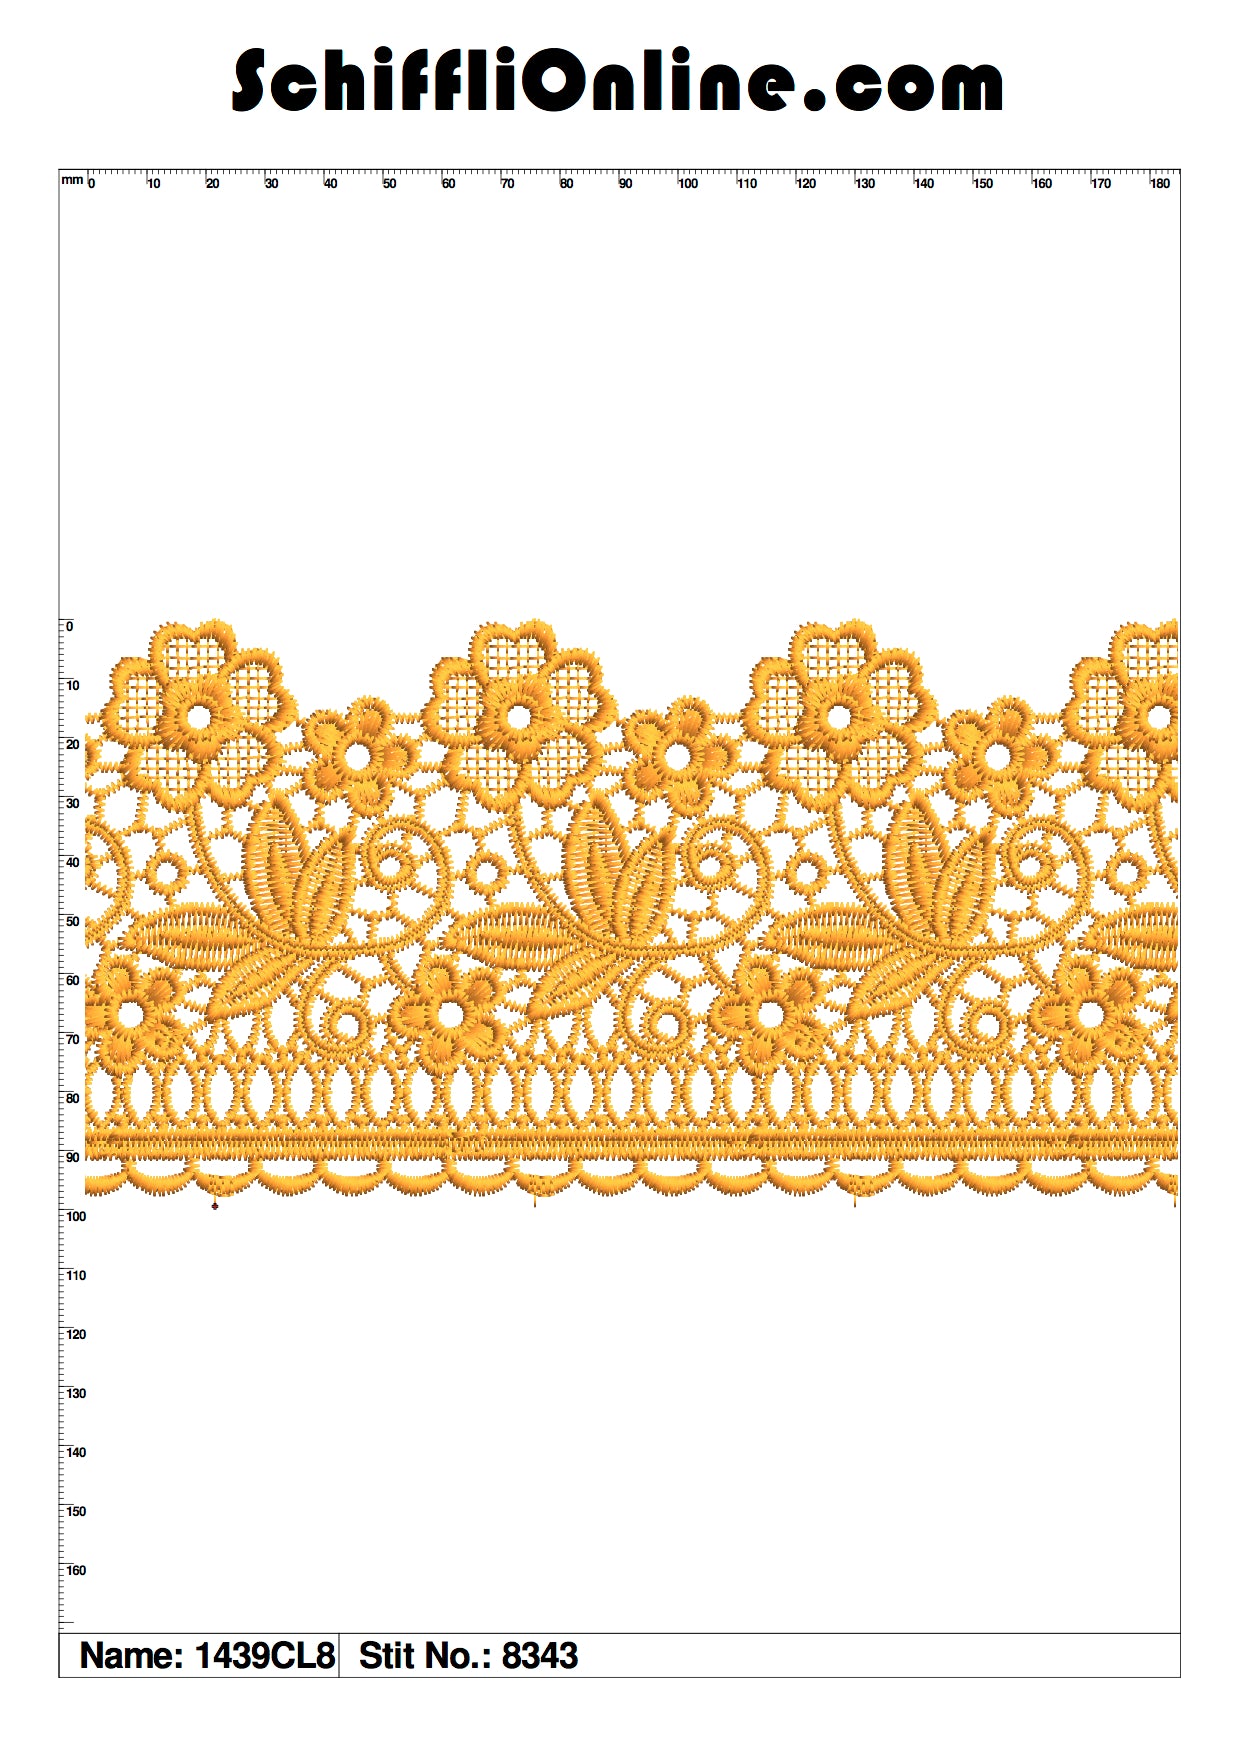 Book 145 CHEMICAL LACE 8X4 50 DESIGNS